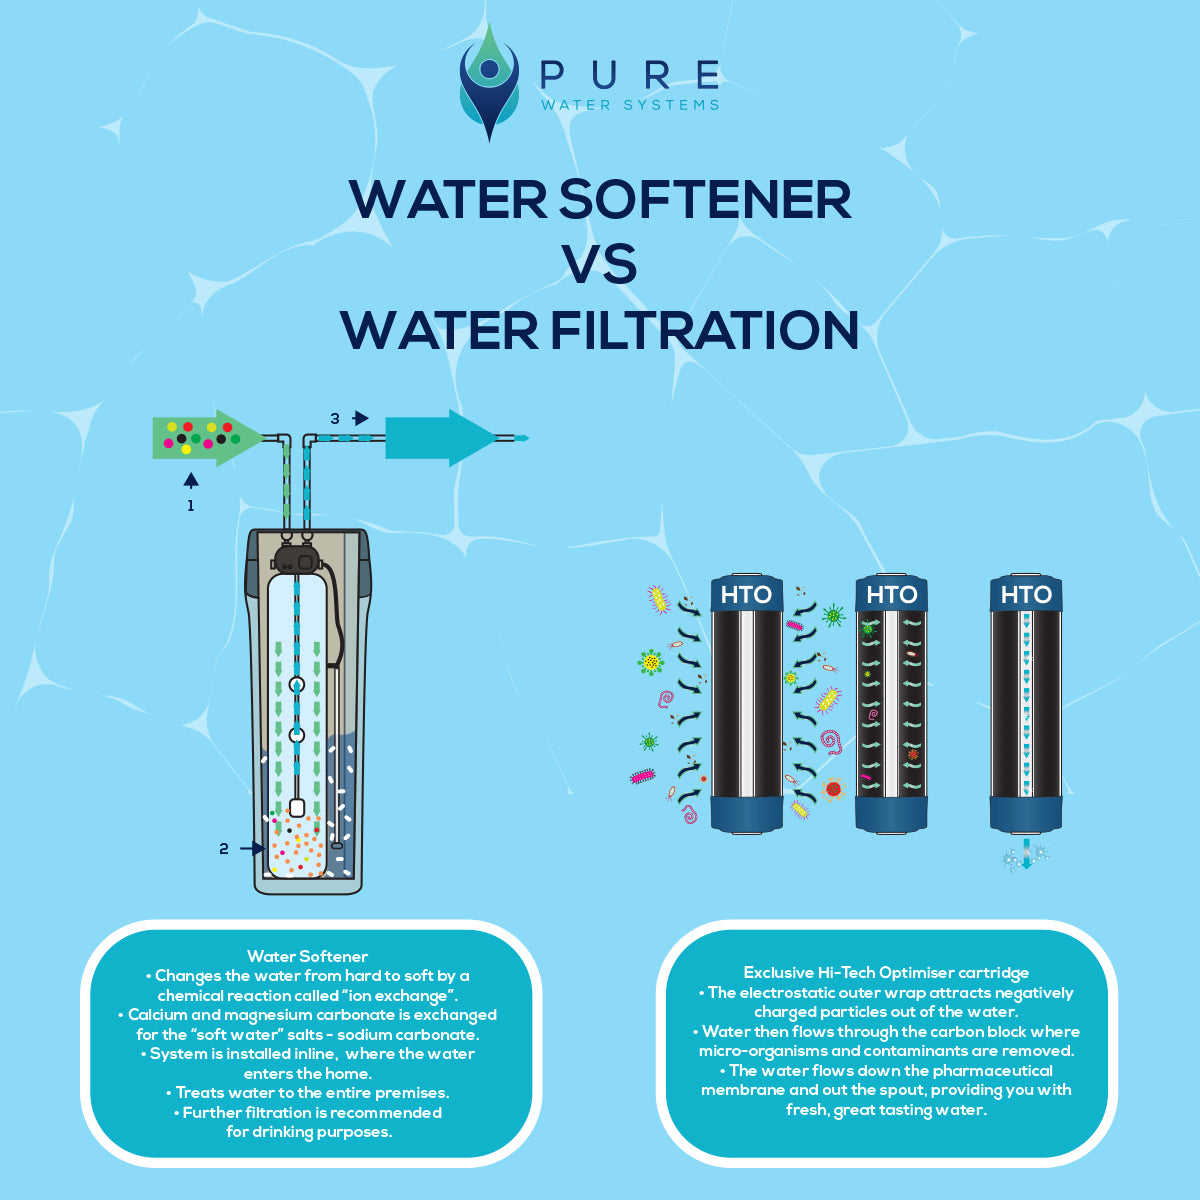 Water Softener vs Water Filtration - Points